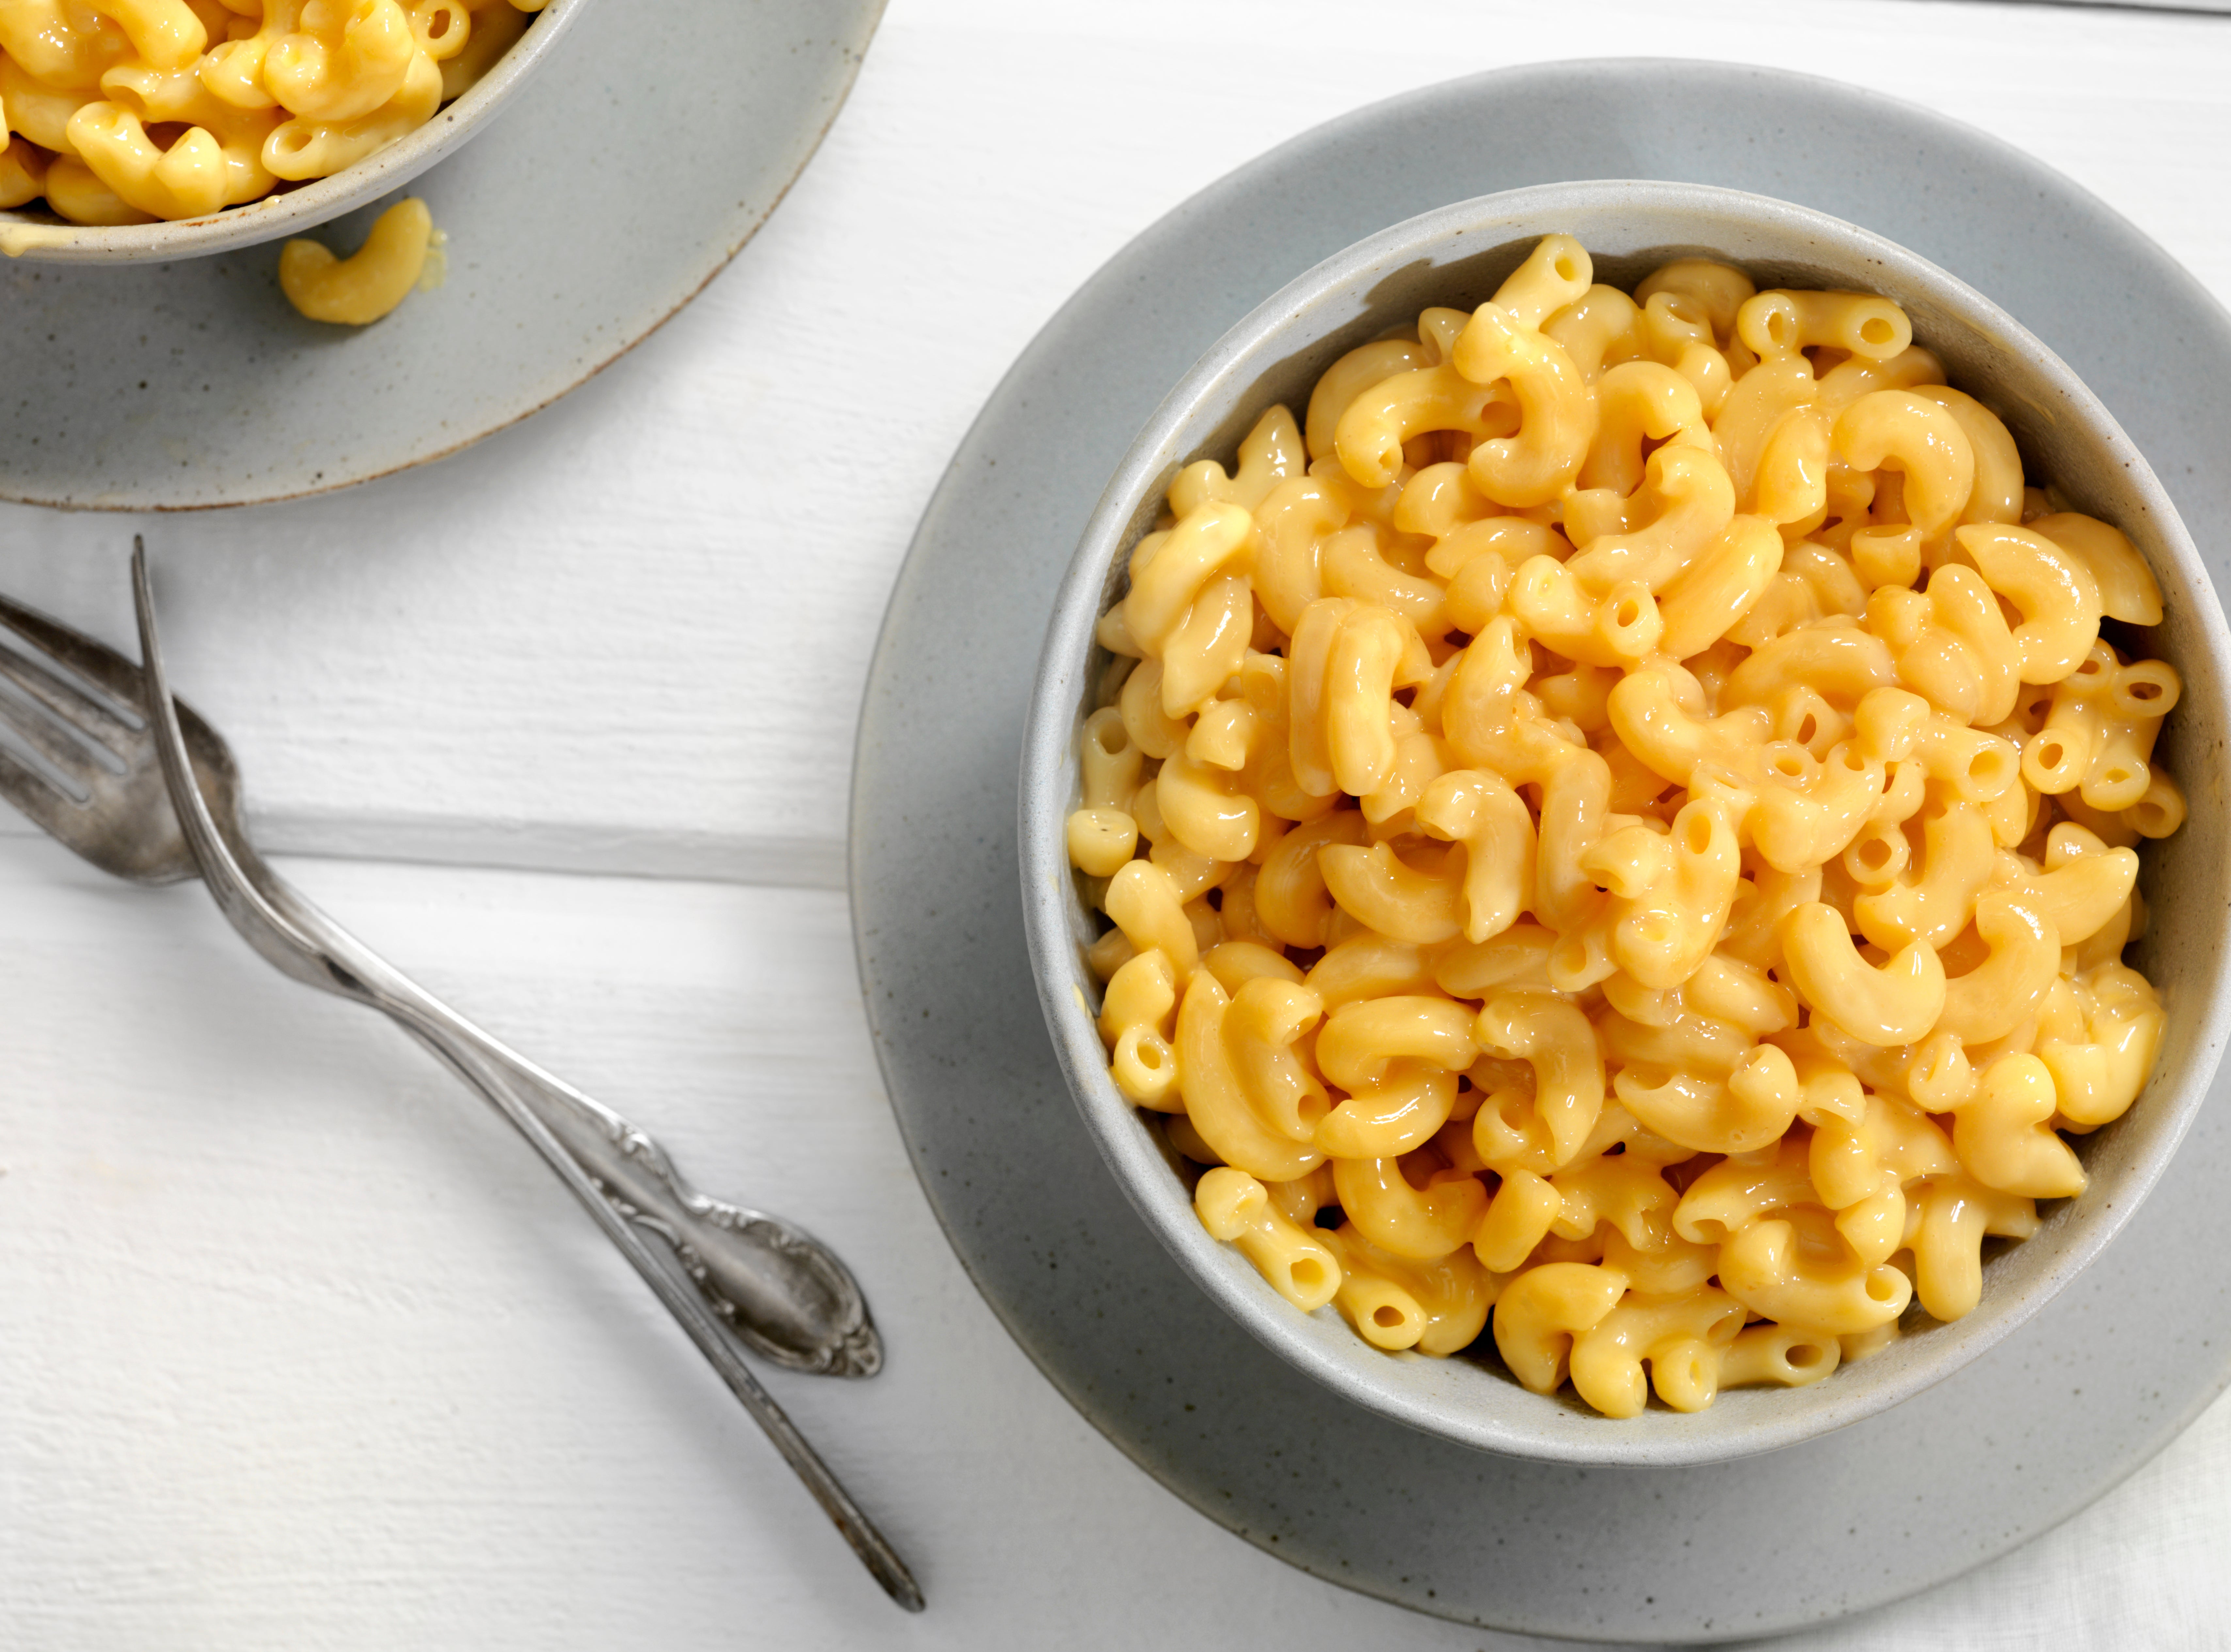 Is it too much to ask for mac and cheese to include cheese?